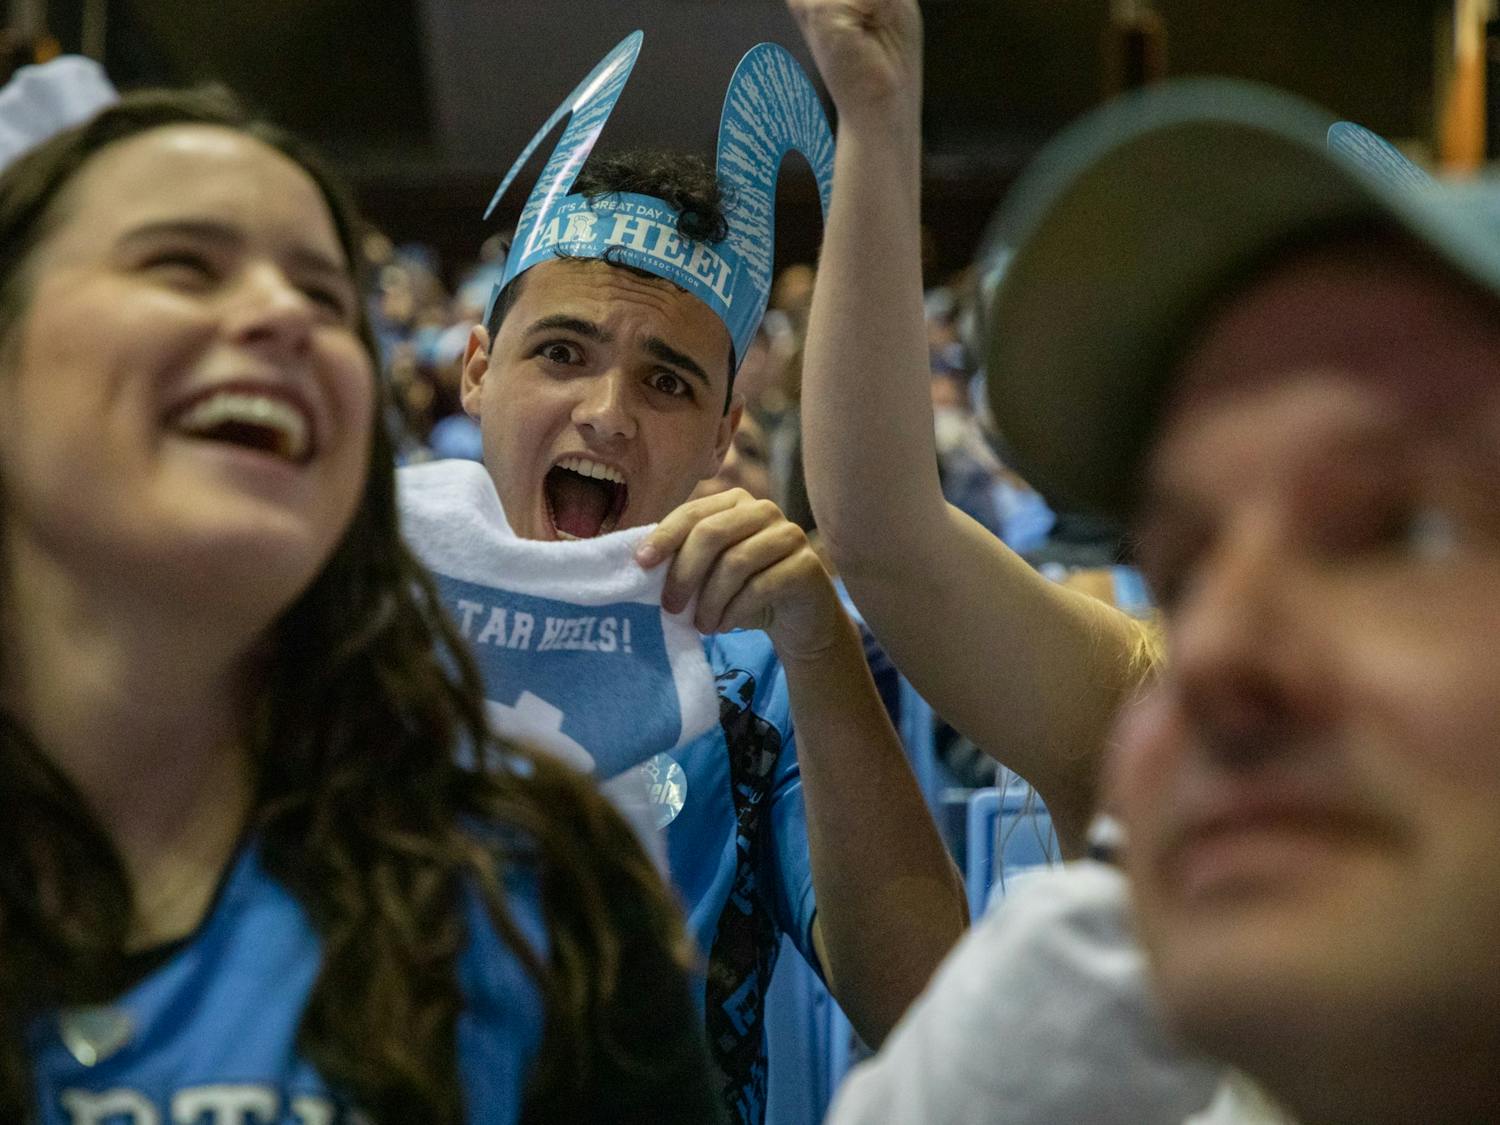 Fans gathered to watch UNC take on Duke in the Final Four at a watch party in the Dean Smith Center on Saturday, Apr. 2, 2022. UNC won 81-77.